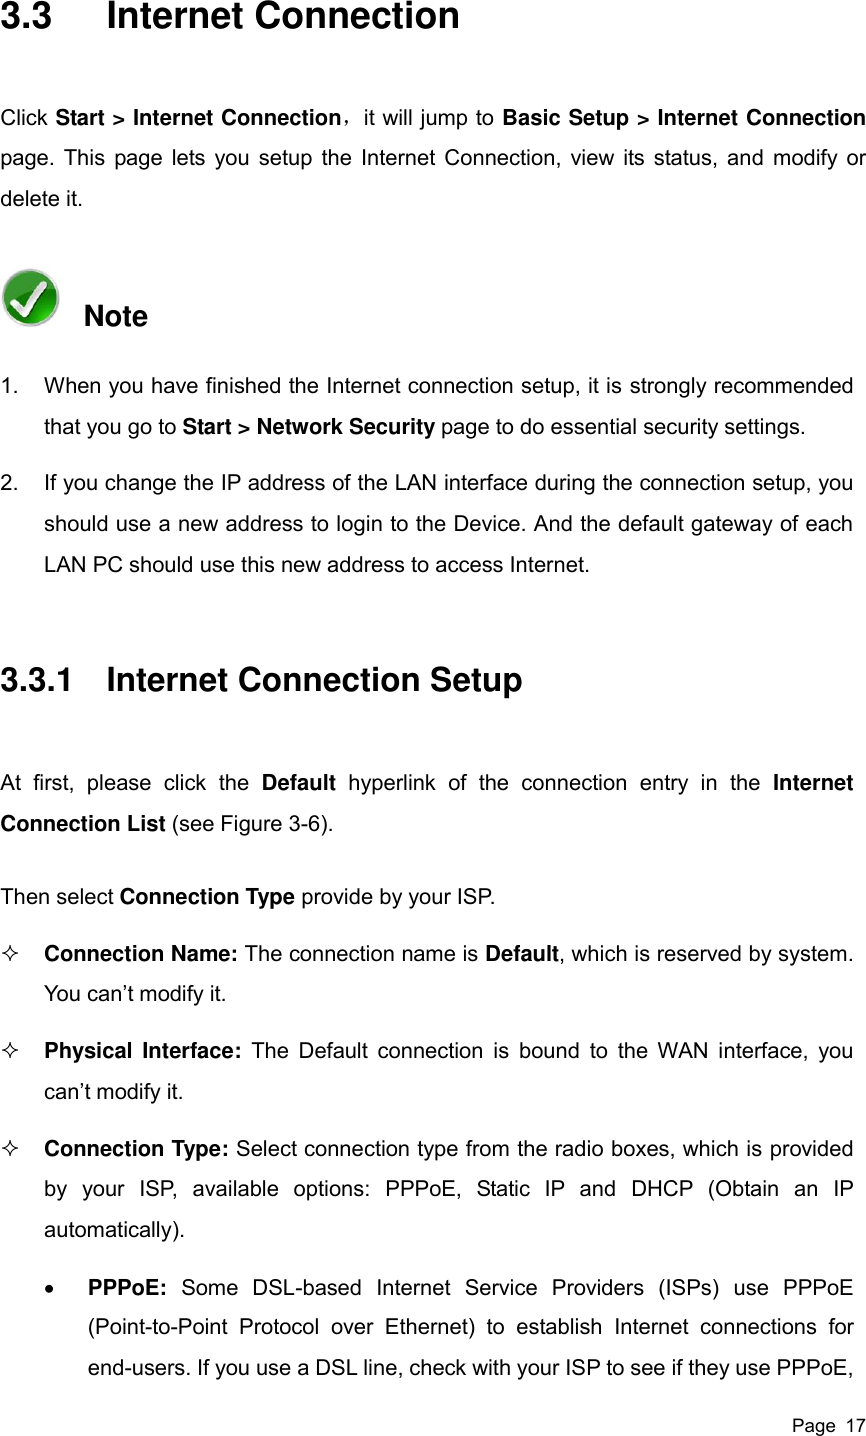  Page  17 3.3  Internet Connection Click Start &gt; Internet Connection，it will jump to Basic Setup &gt; Internet Connection page. This page lets you setup the Internet Connection, view its status, and modify or delete it.   Note 1.  When you have finished the Internet connection setup, it is strongly recommended that you go to Start &gt; Network Security page to do essential security settings. 2.  If you change the IP address of the LAN interface during the connection setup, you should use a new address to login to the Device. And the default gateway of each LAN PC should use this new address to access Internet. 3.3.1  Internet Connection Setup At  first,  please  click  the  Default  hyperlink  of  the  connection  entry  in  the  Internet Connection List (see Figure 3-6). Then select Connection Type provide by your ISP.  Connection Name: The connection name is Default, which is reserved by system. You can’t modify it.  Physical Interface:  The  Default  connection is  bound to the WAN interface, you can’t modify it.  Connection Type: Select connection type from the radio boxes, which is provided by  your  ISP,  available  options:  PPPoE,  Static  IP  and  DHCP  (Obtain  an  IP automatically).    PPPoE:  Some  DSL-based  Internet  Service  Providers  (ISPs)  use  PPPoE (Point-to-Point  Protocol  over  Ethernet)  to  establish  Internet  connections  for end-users. If you use a DSL line, check with your ISP to see if they use PPPoE, 